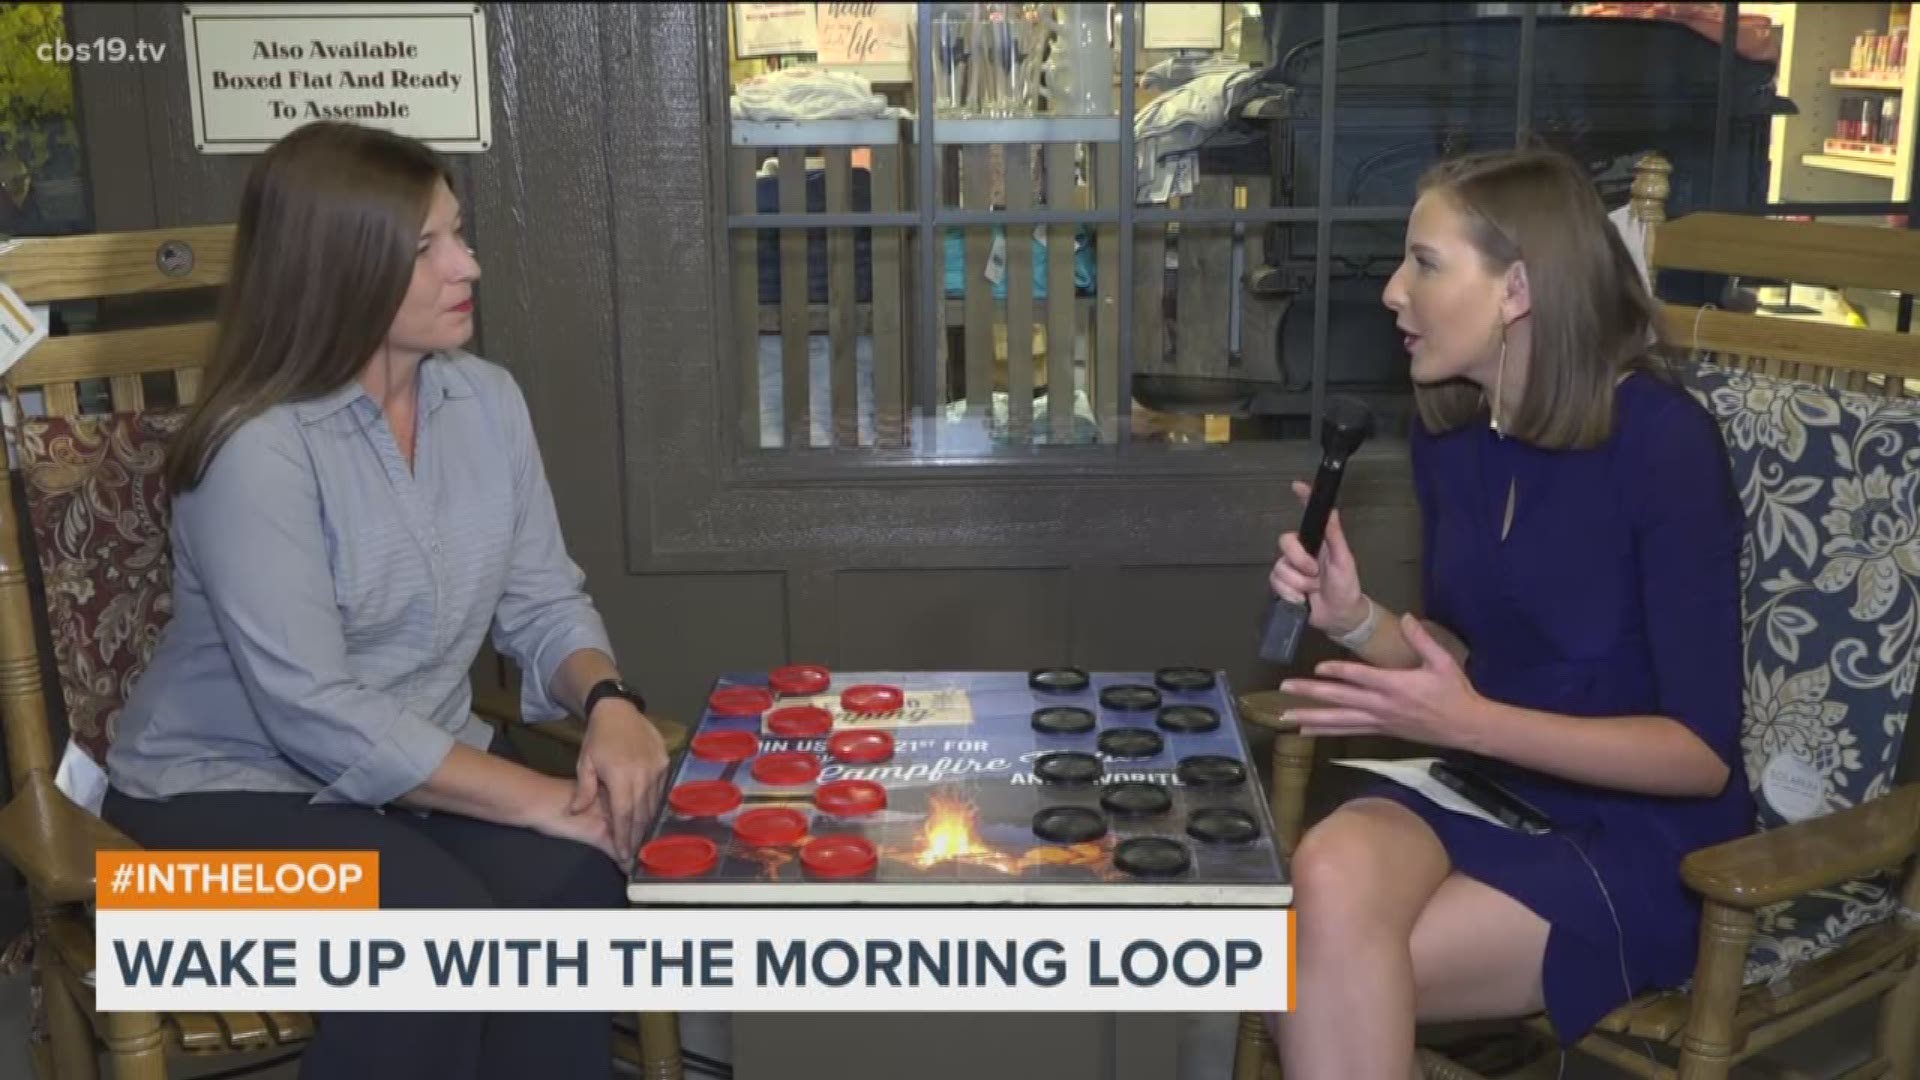 The Morning Loop team is celebrating the start of the weekend at a local breakfast spot in East Texas. Jen Moynihan sits down with Cracker Barrel Assistant Manager Dusty Hooks to chat. 